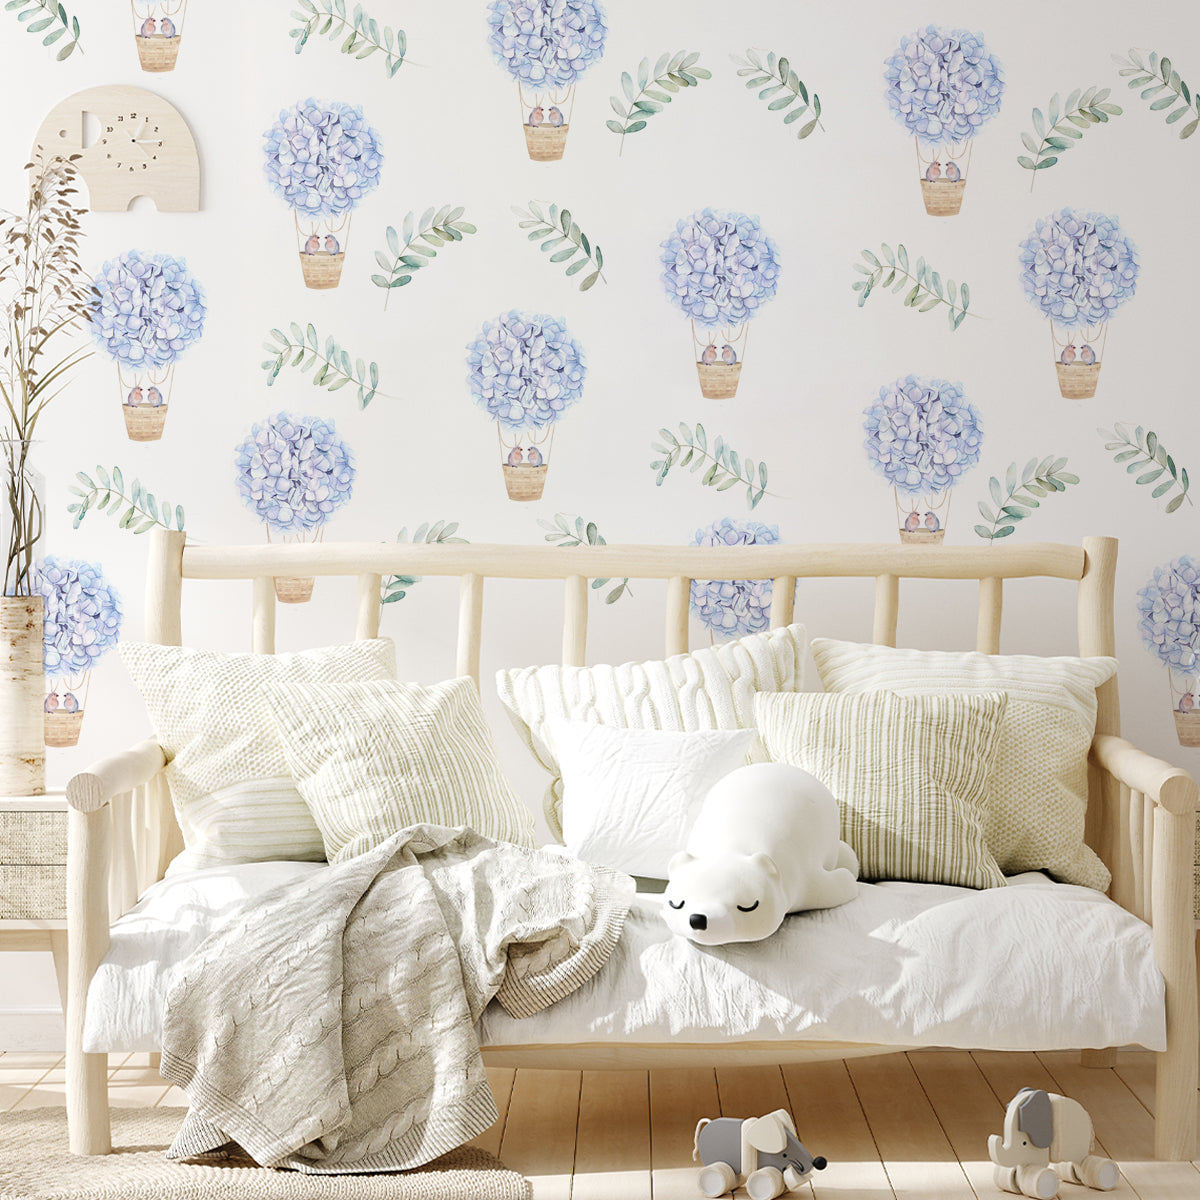 kids bedroom wall stickers, nursery wall stickers, wall stickers, wall decal , wall tattoo, floral hot air balloons with birds wall sticker, hot air balloon wall sticker, birds wall sticker, girls wall sticker, wall stickers with birds, scandinavian wall stickers, kids bedroom ideas, nursery ideas, nordic wall stickers, wall decor ideas